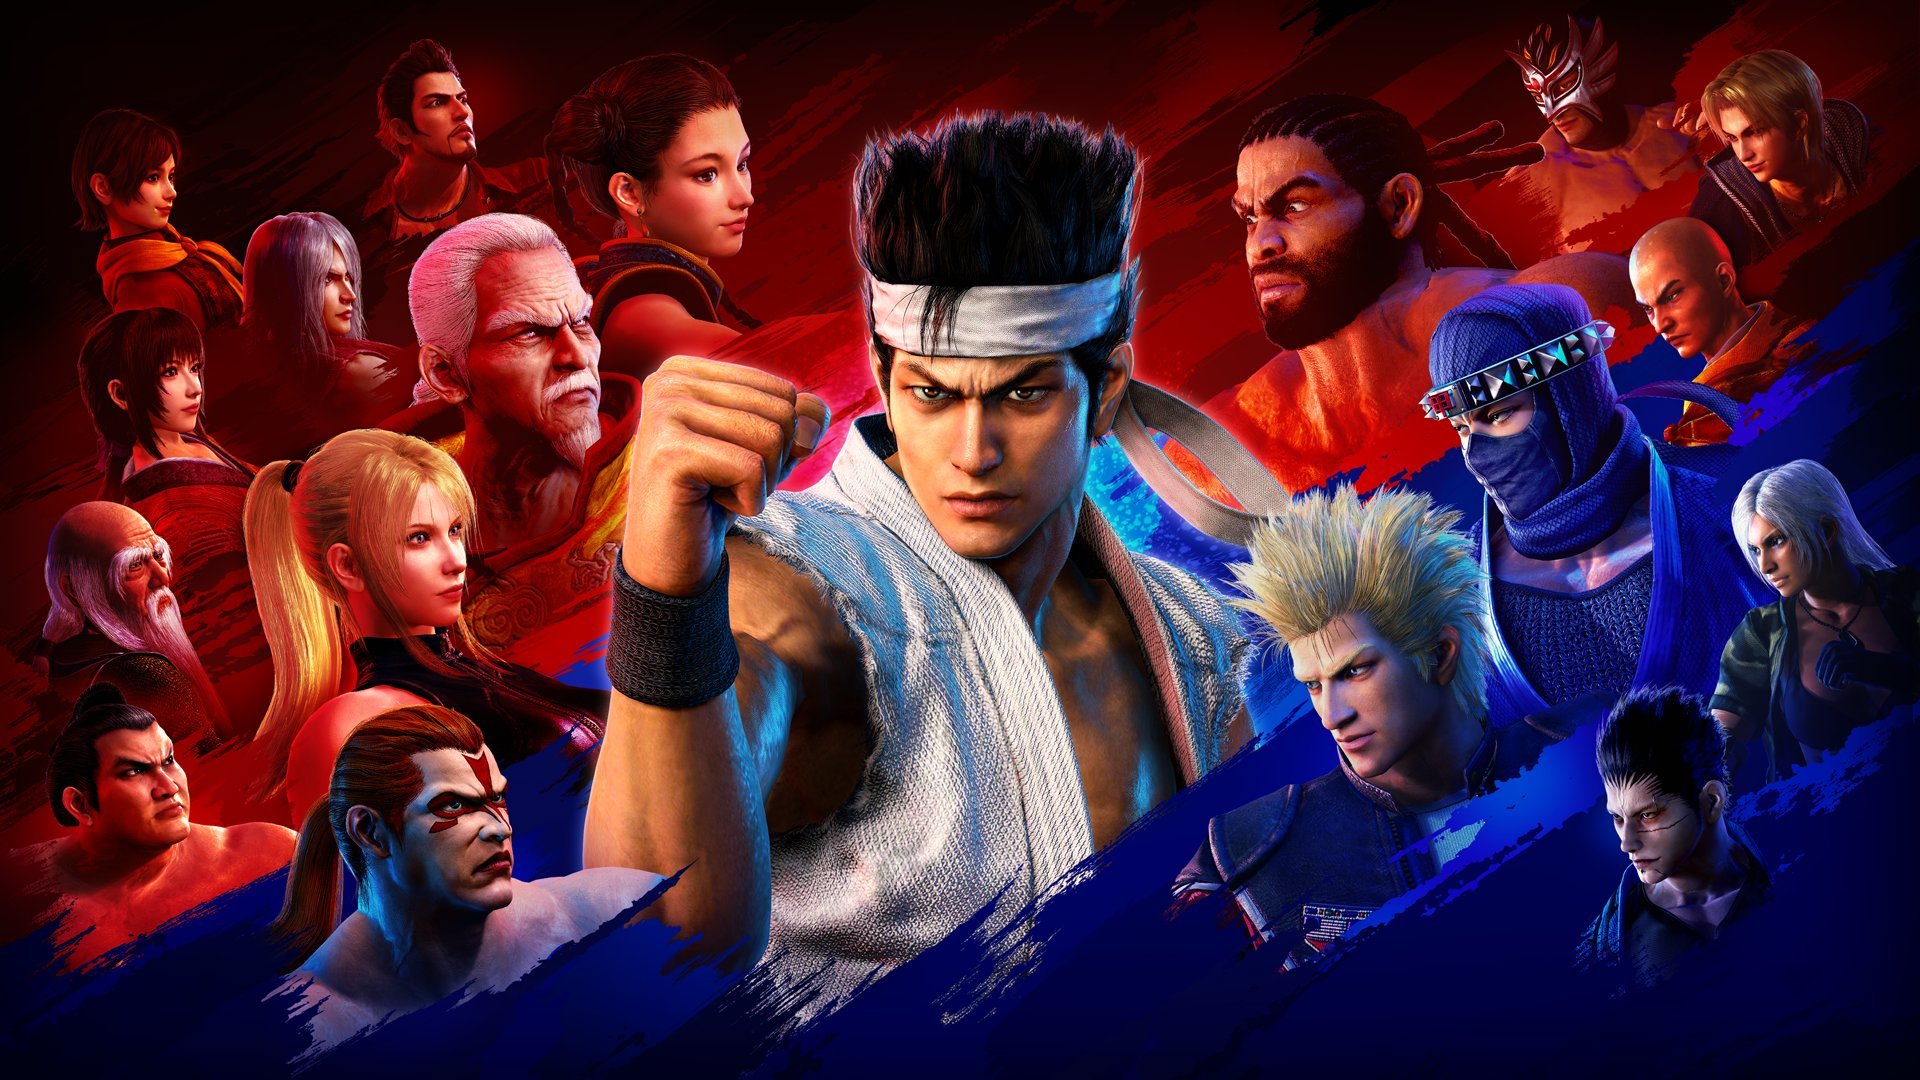 Virtua Fighter 5 Ultimate Showdown is out next week with new graphics